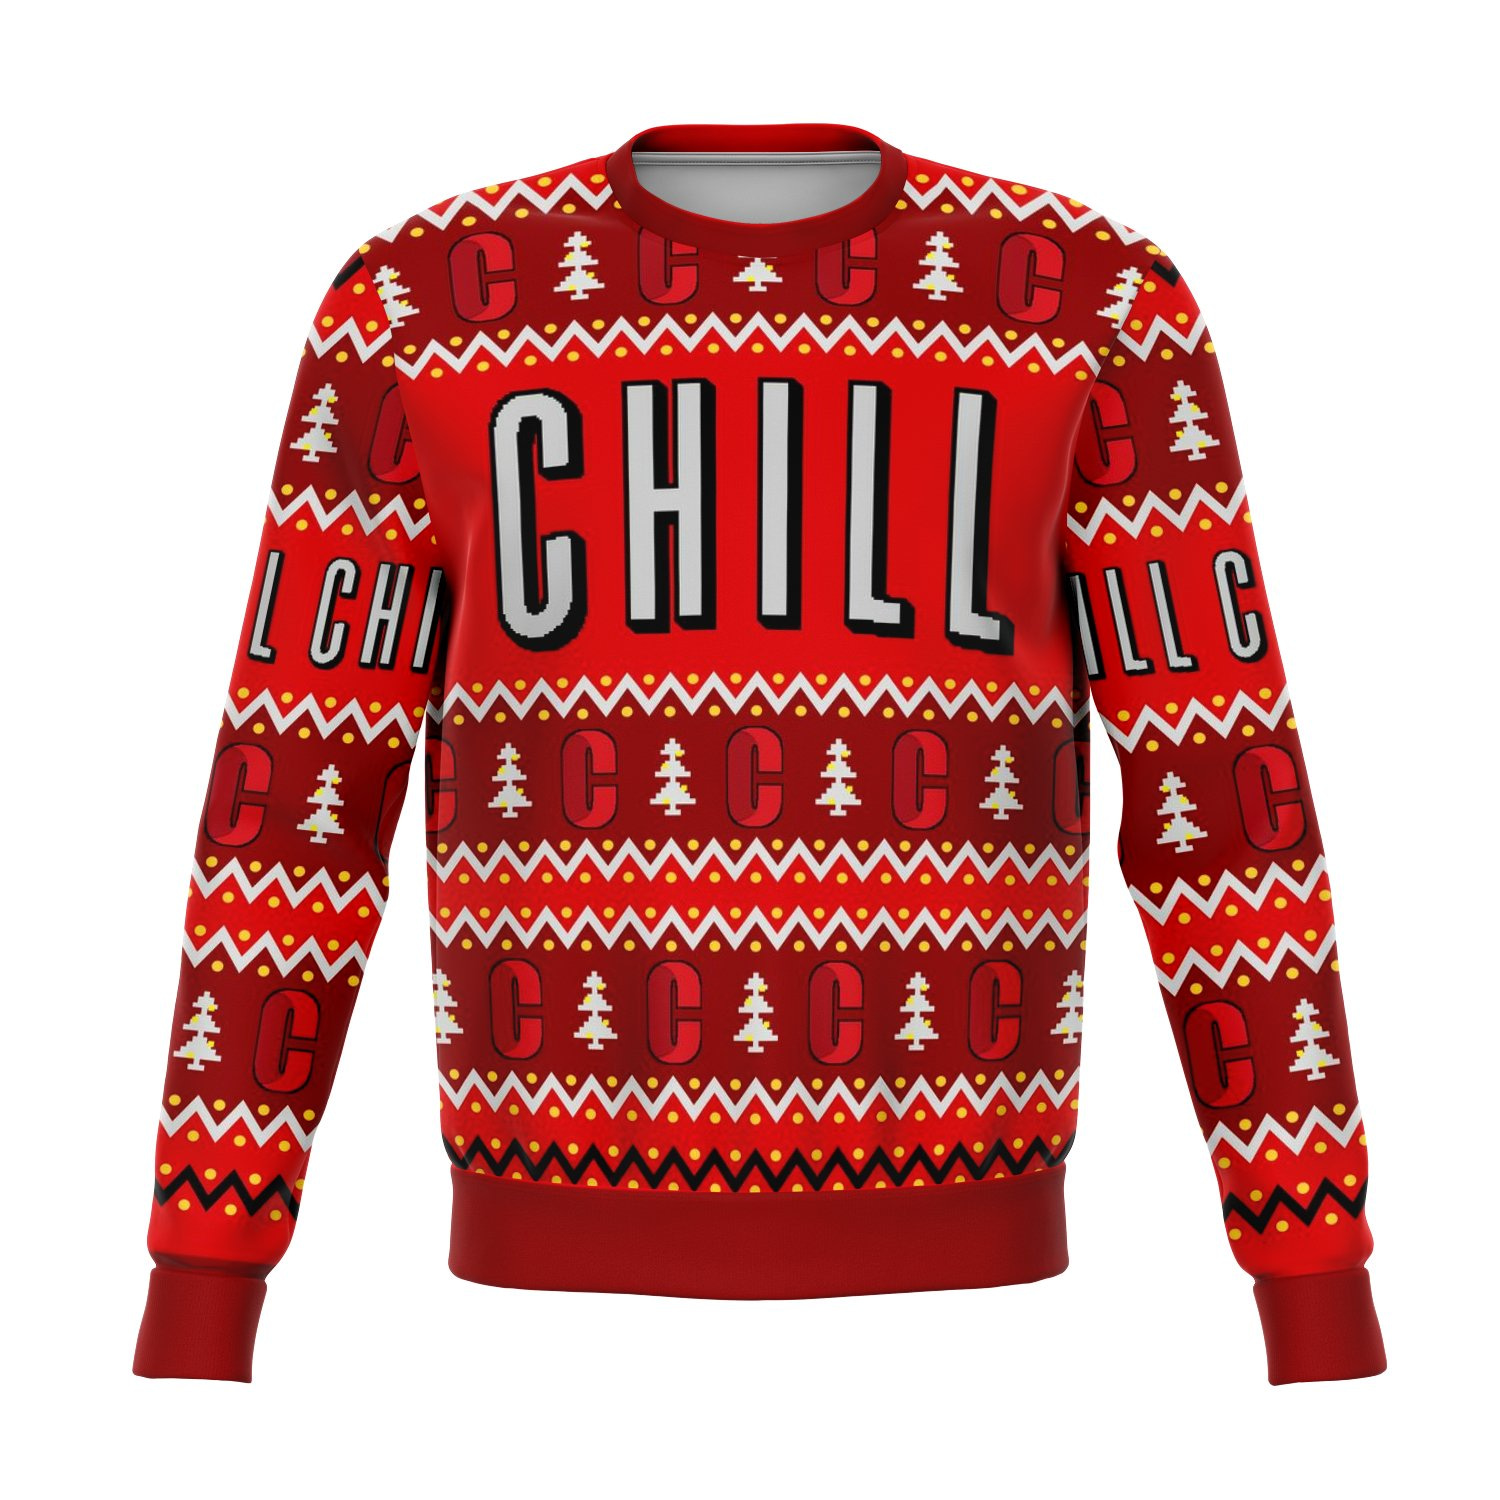 Chill Funny Ugly Sweater